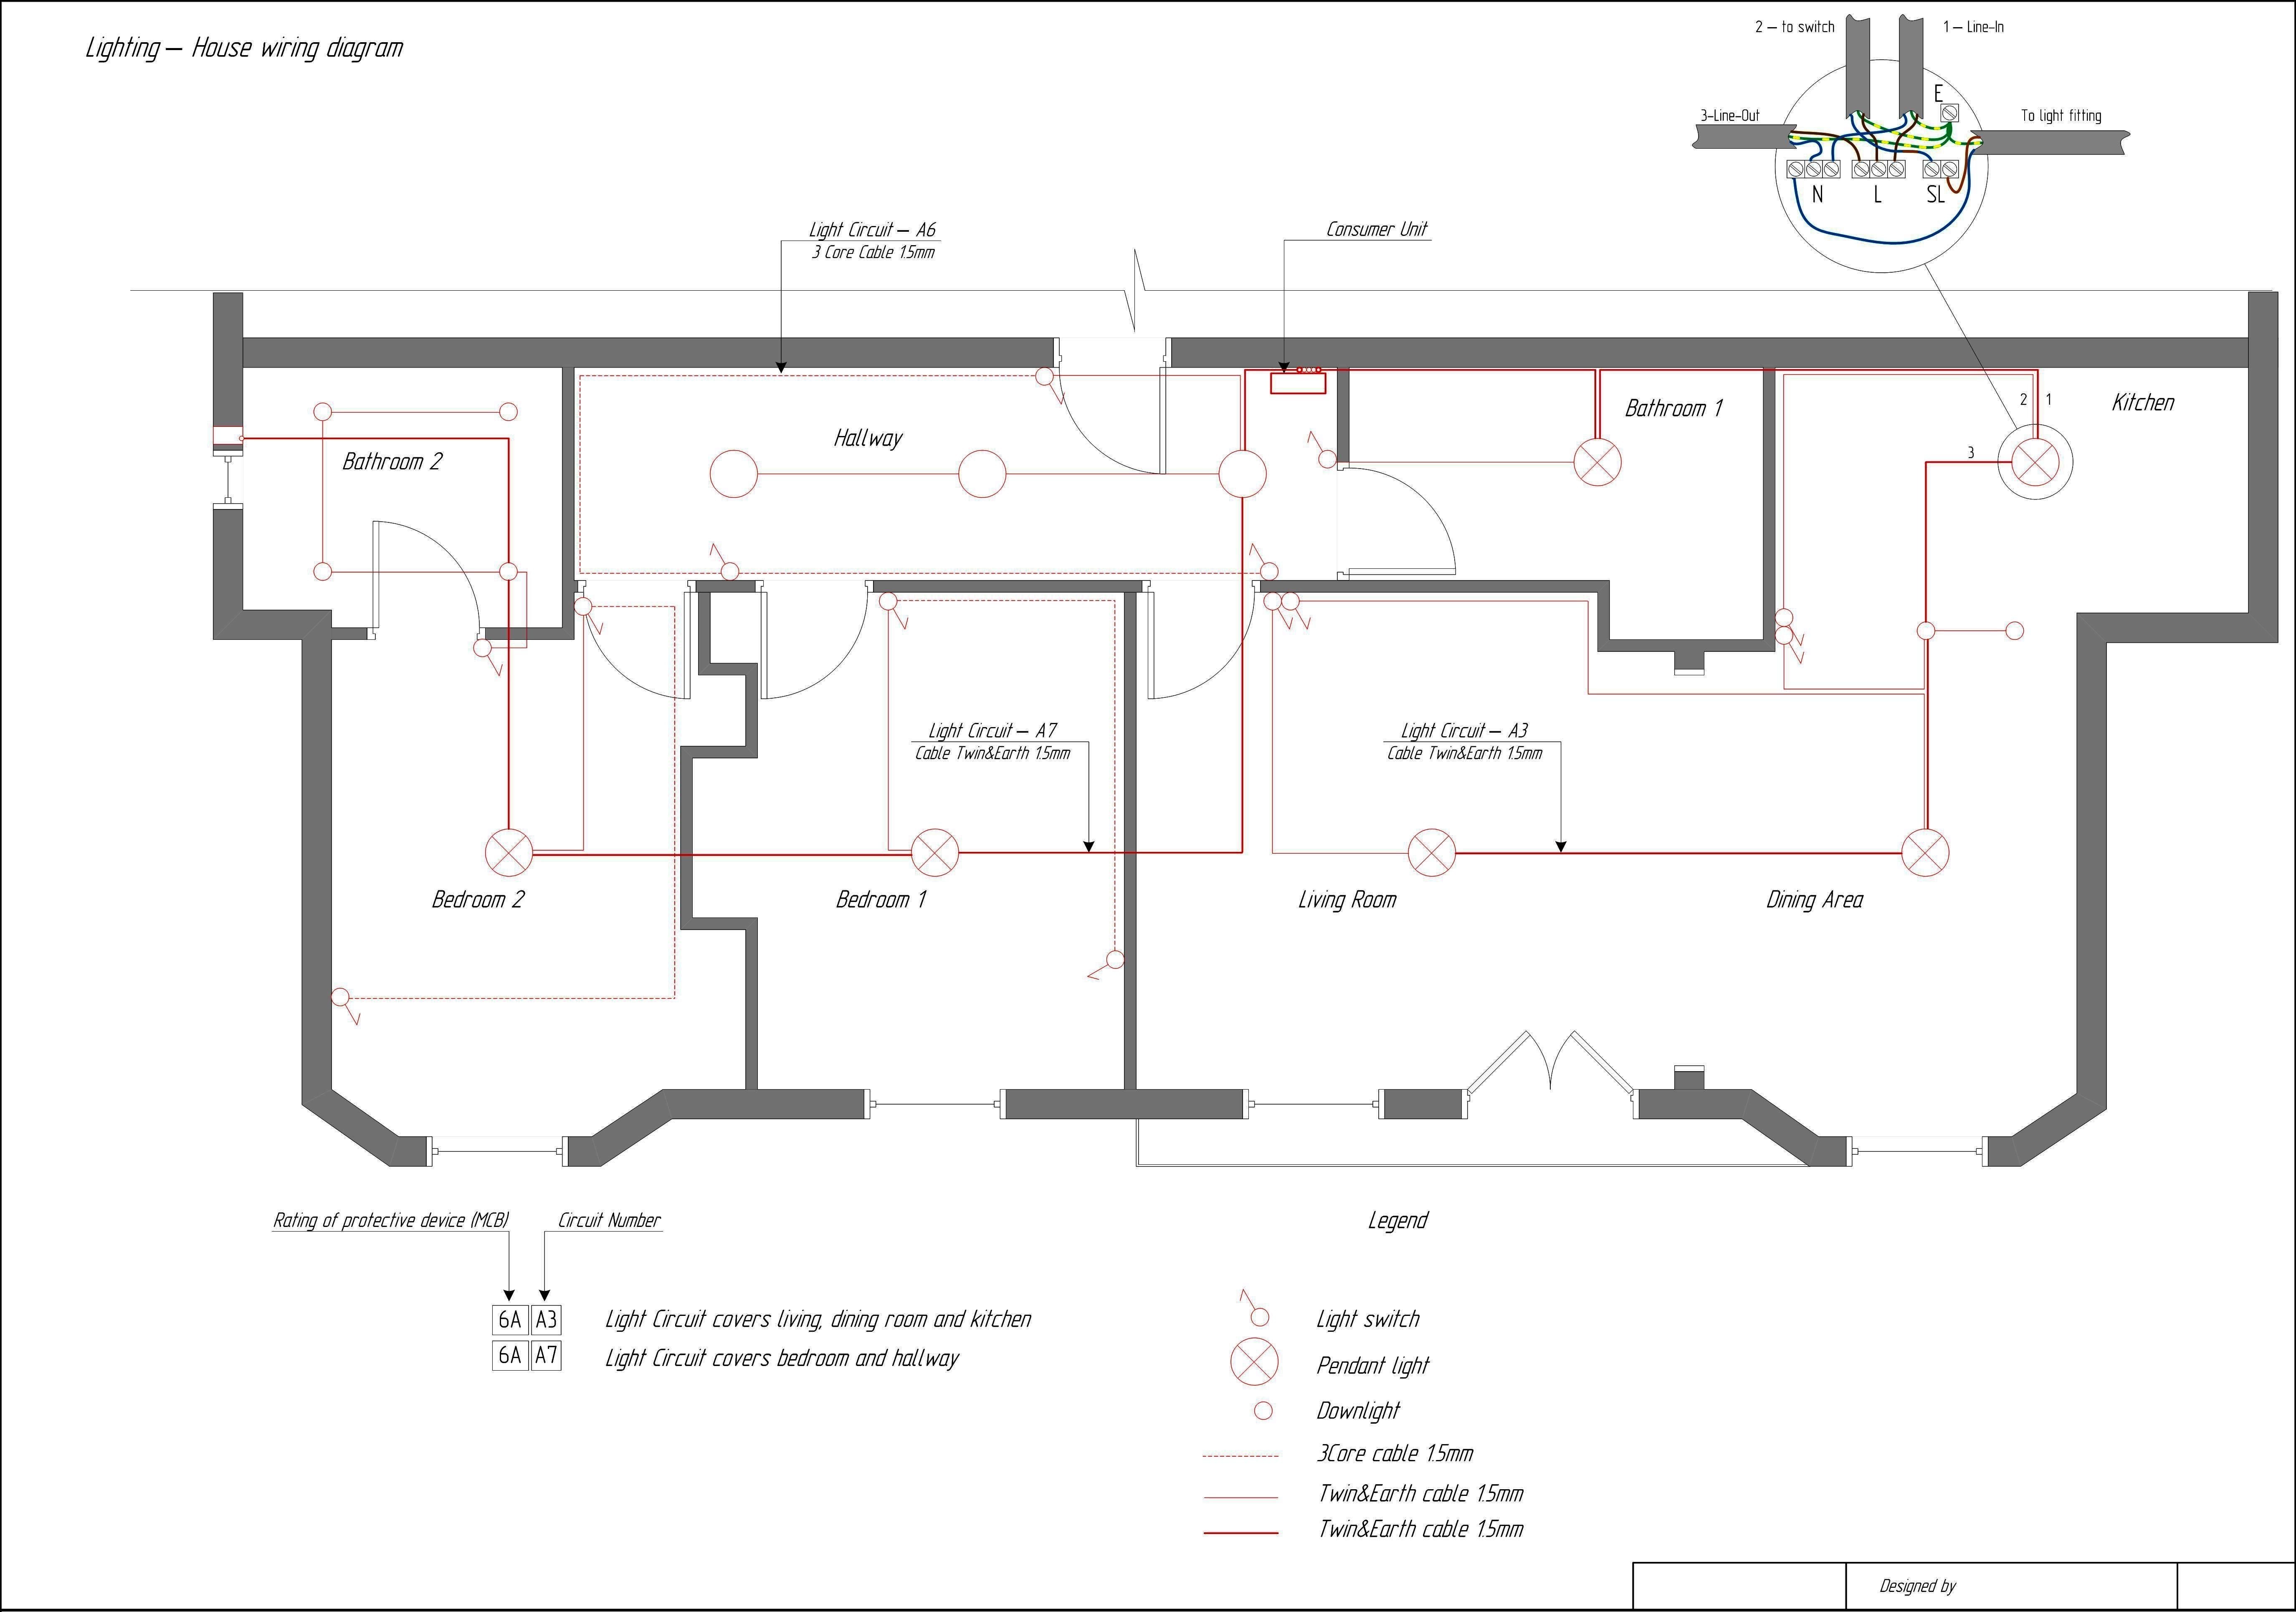 Wiring Diagram For House Wiring Save House Wiring Diagram Electrical Floor Plan 2004 2010 Bmw X3 E83 3 0d